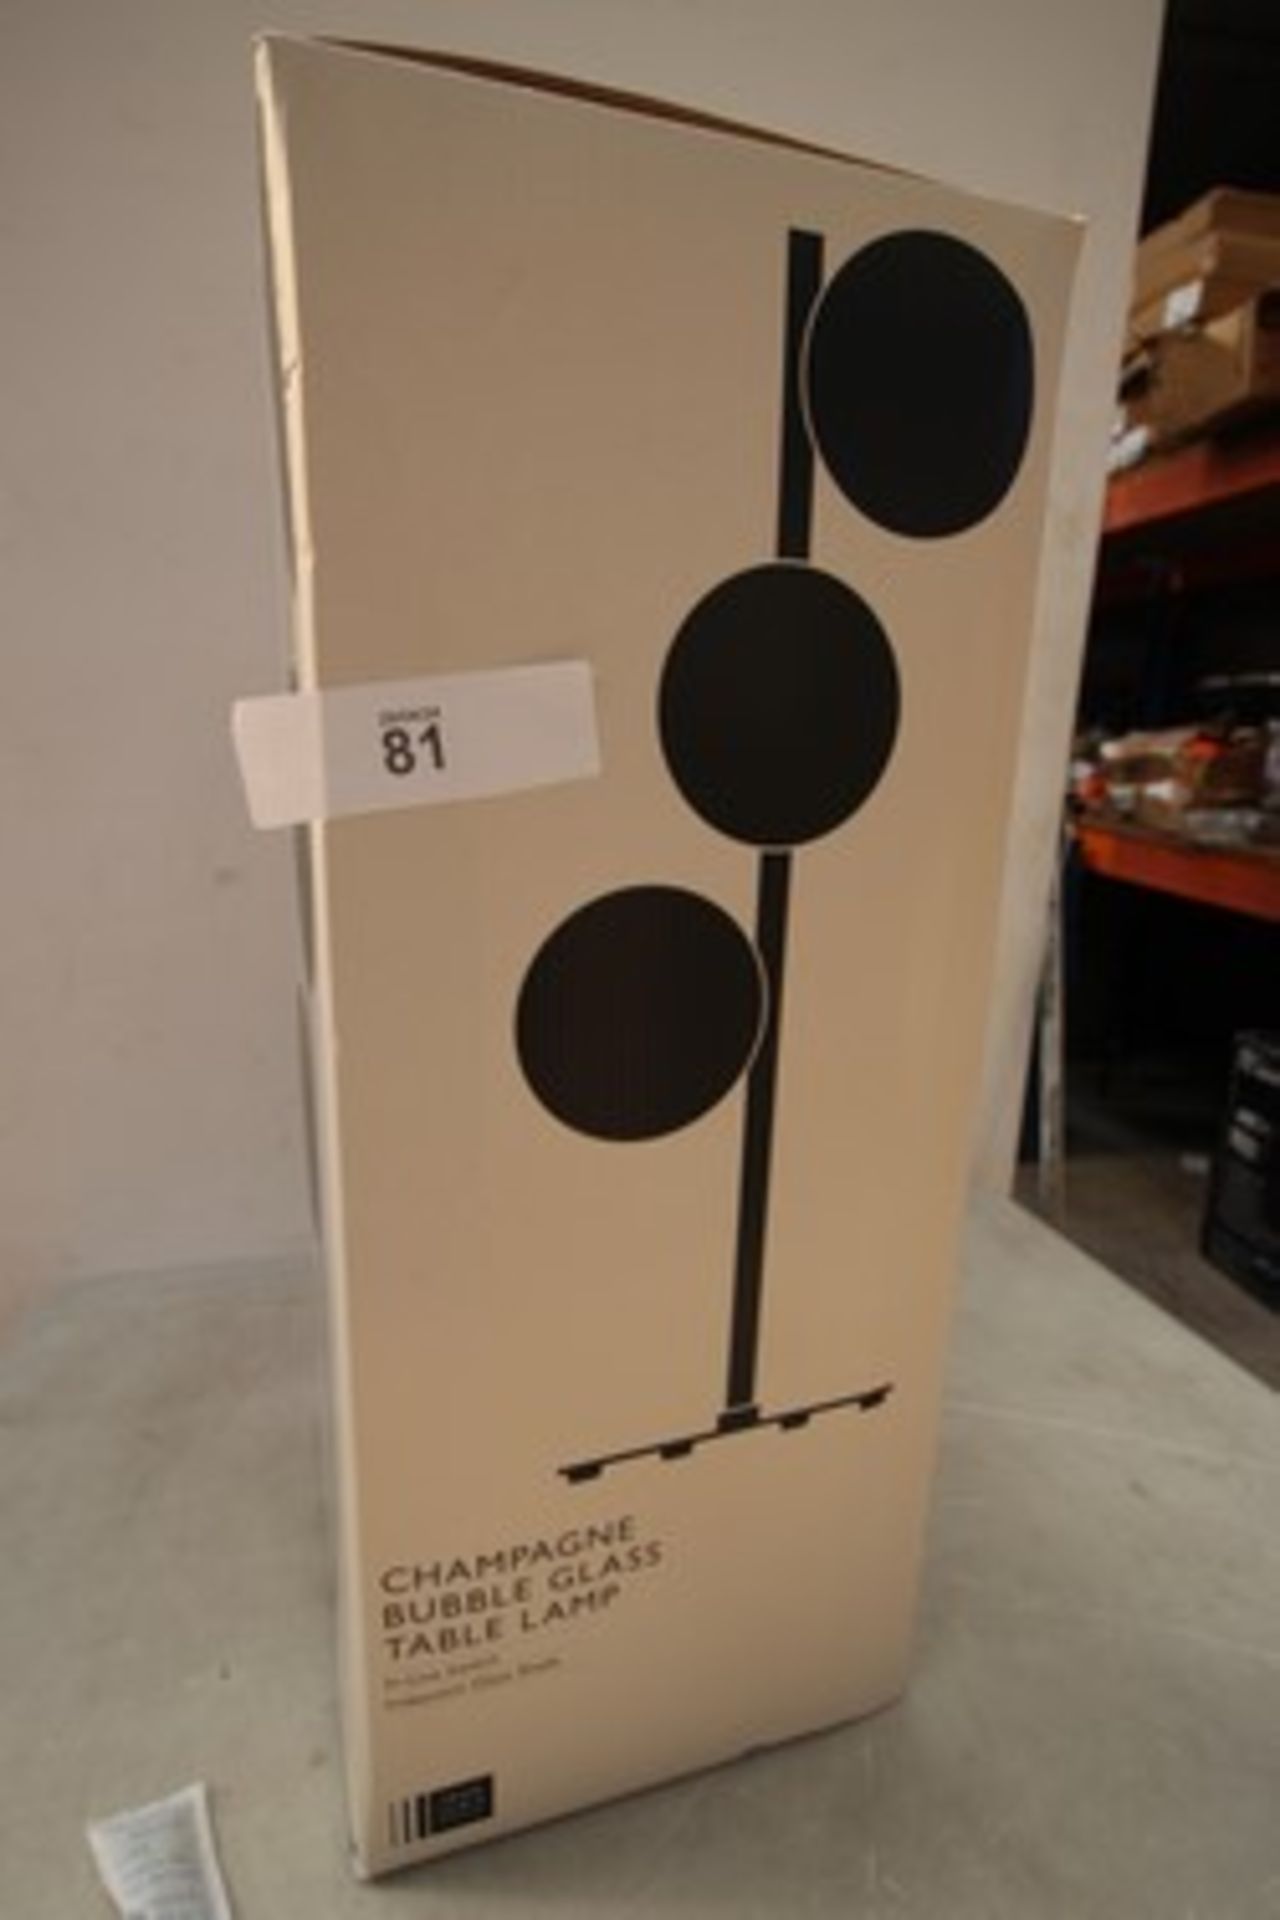 1 x John Lewis champagne bubble glass table lamp, EAN: 5063036227808 - new in box (ES14) - Image 2 of 2